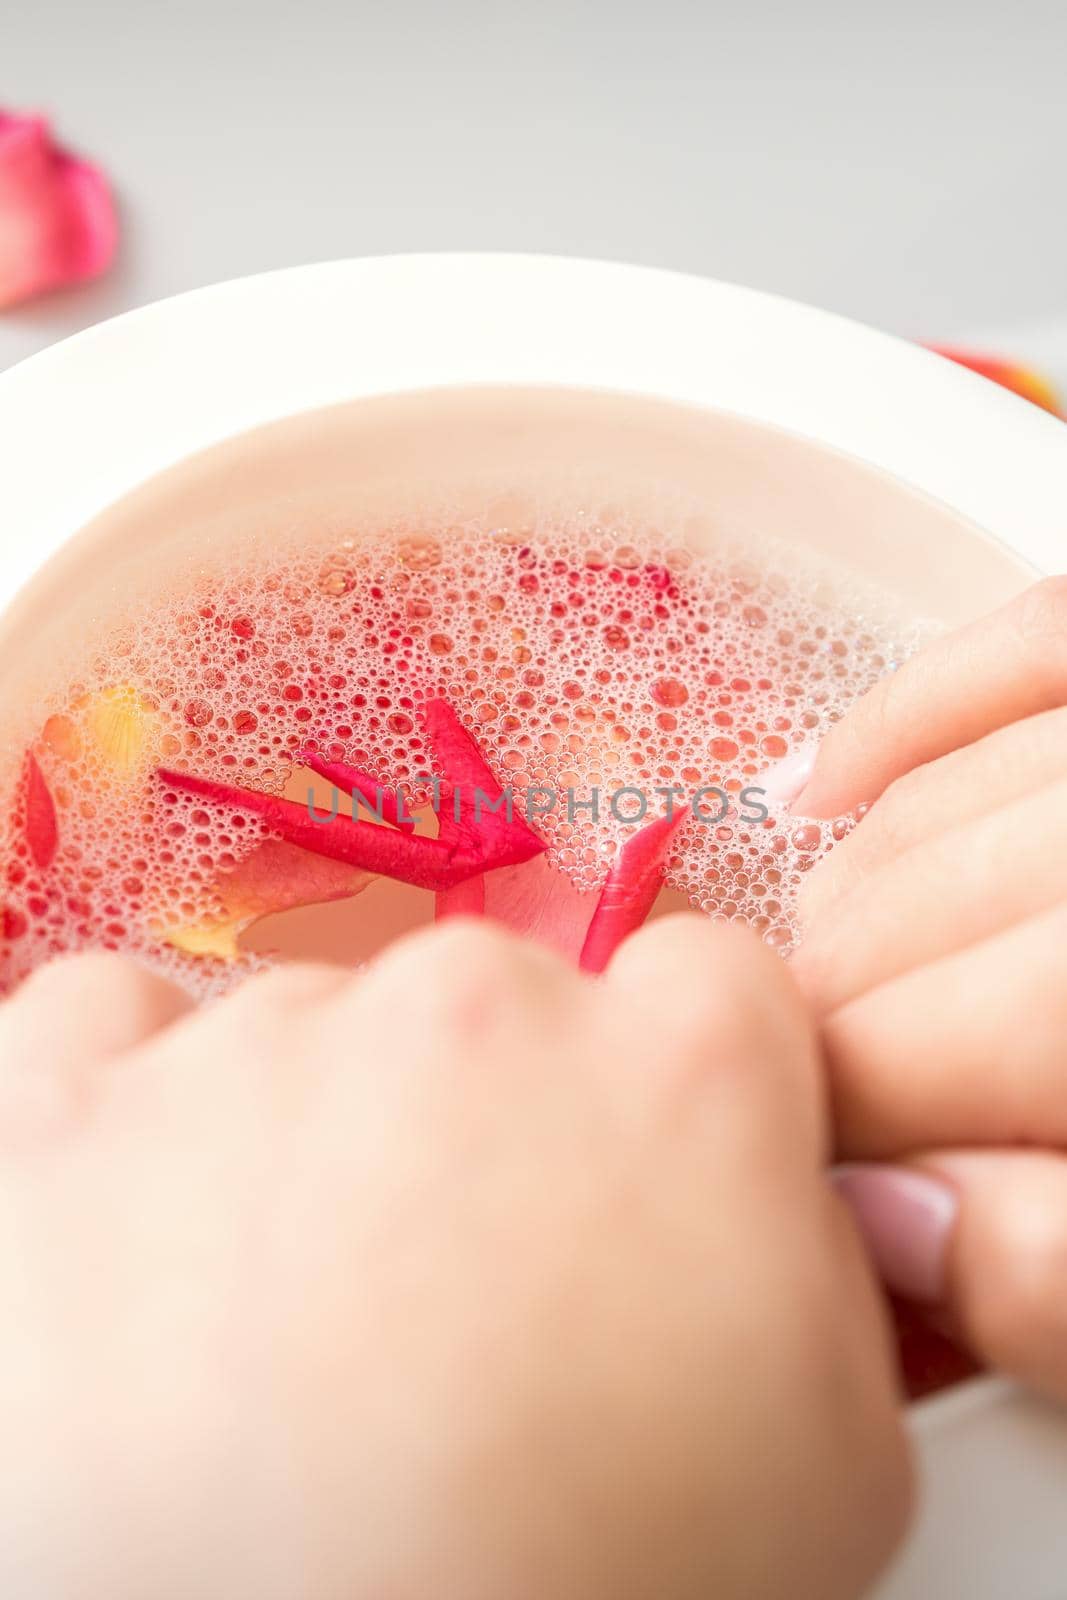 Female hands in a bowl of water with pink petals of rose flowers in spa